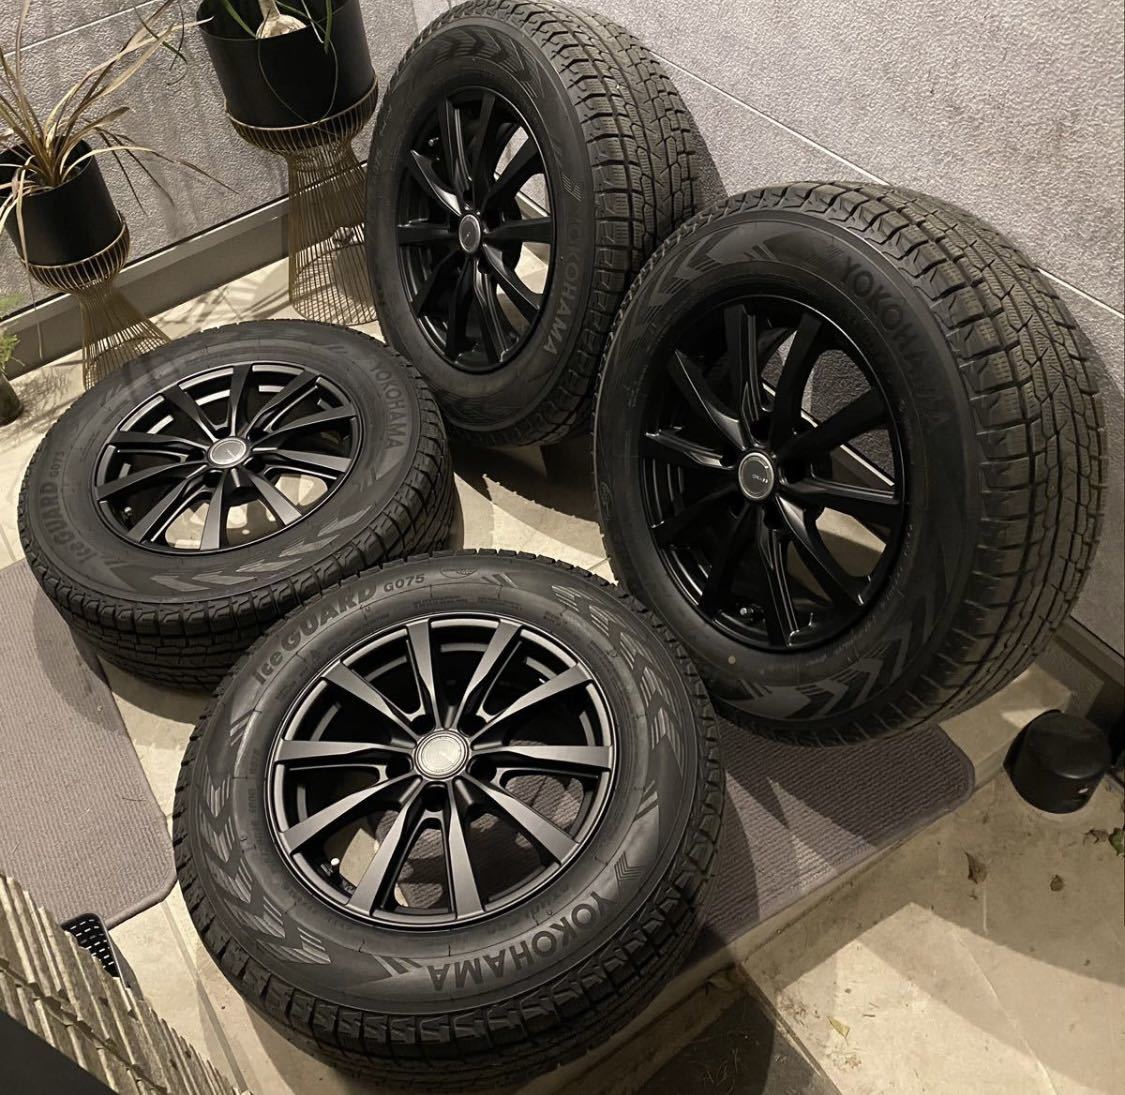  super super burr mountain!2019 year made 16 inch aluminium wheels & studless 4ps.@ approximately 9 amount of crown 215/70R16 PCD114.3/5 hole 6.5J+38 mat black Delica D:5 X-trail 